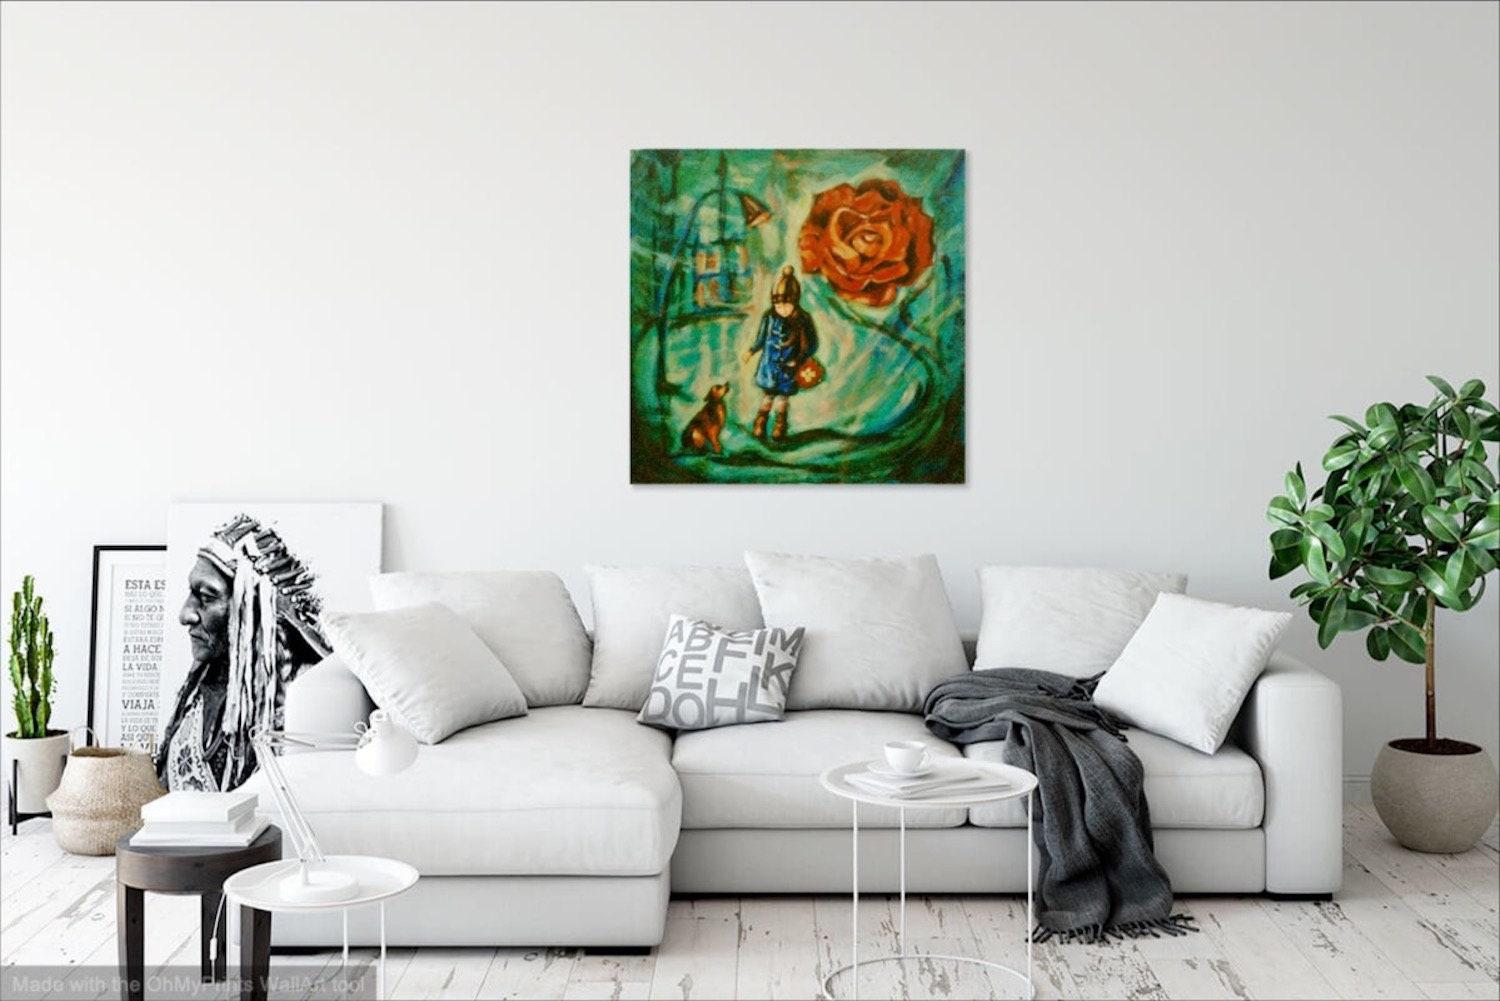 Girl & Dog - Impressionist Original Painting of whimsical city scene with vintage rose symbol and lamppost in a dreamy surreal night picture